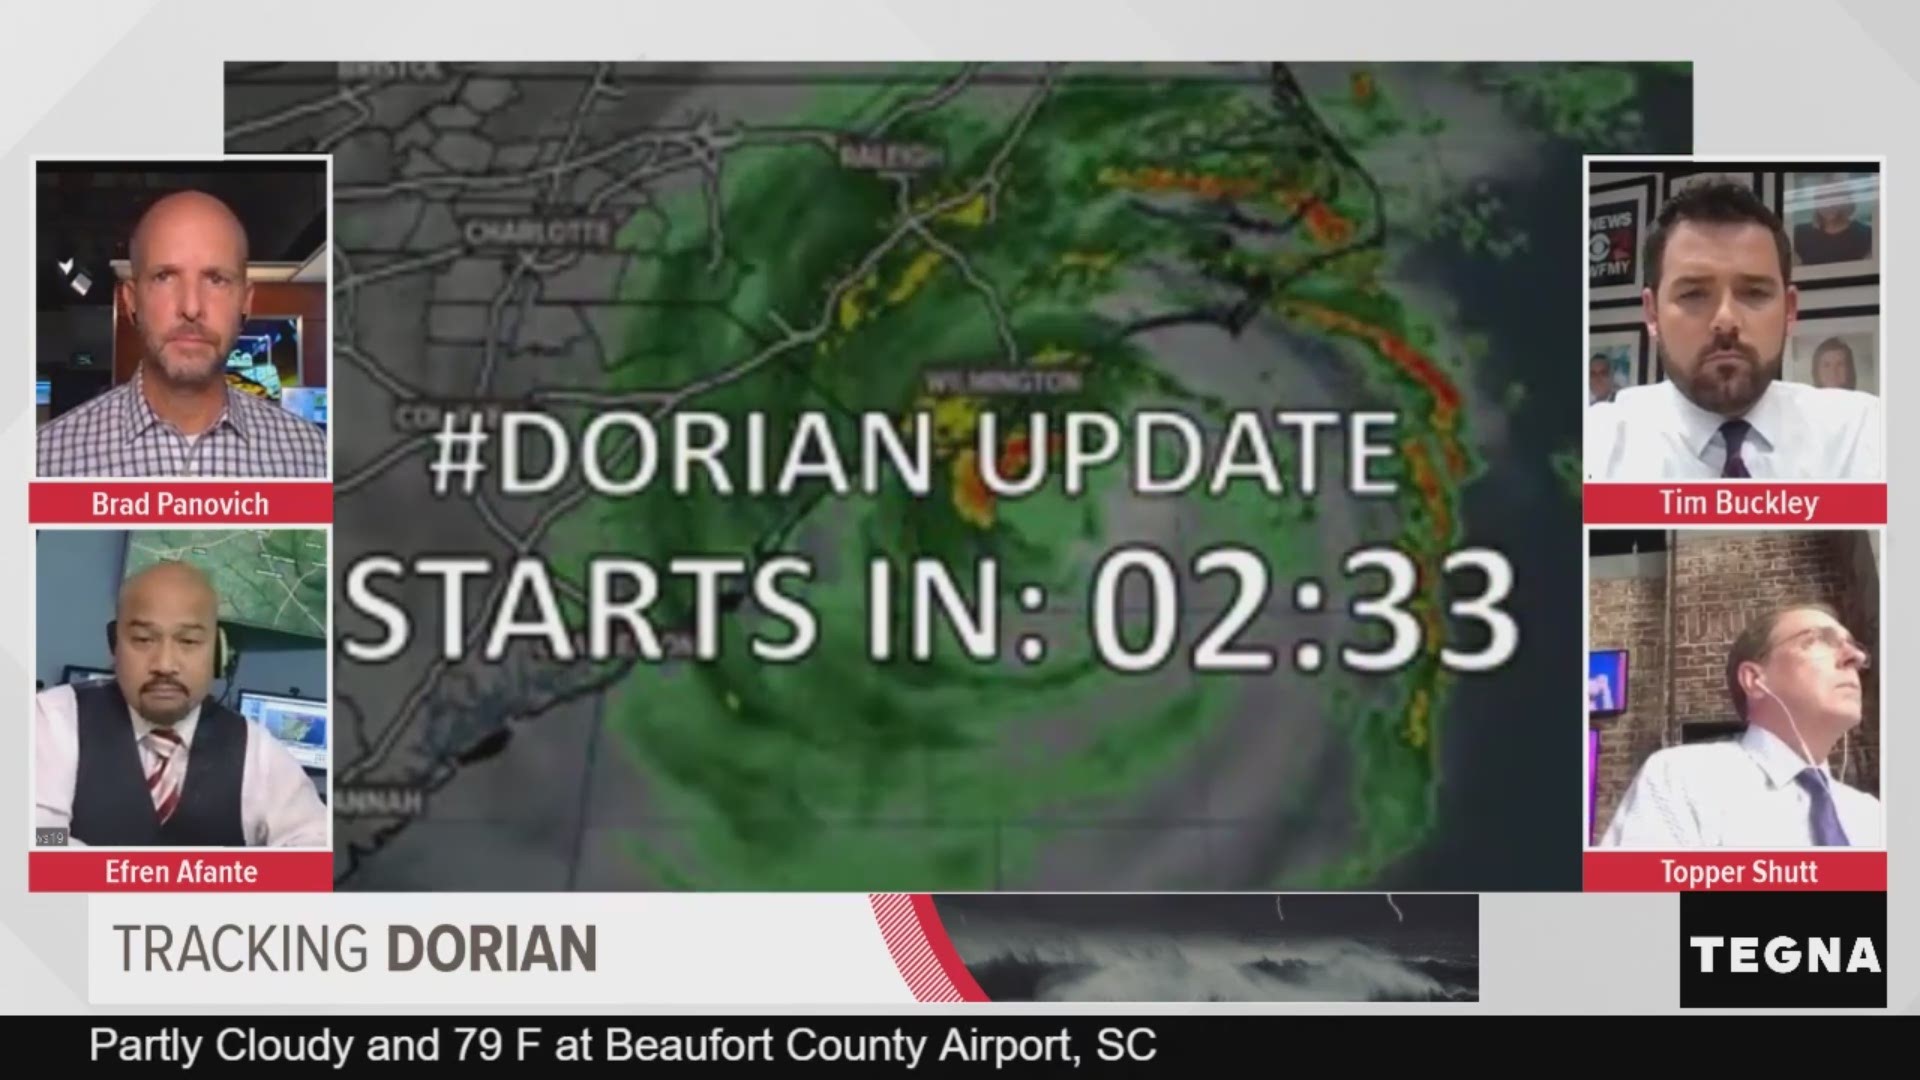 They're your weather insiders! Chief Meteorologist Brad Panovich is joined by meteorologists across the region tracking and analyzing Hurricane Dorian.